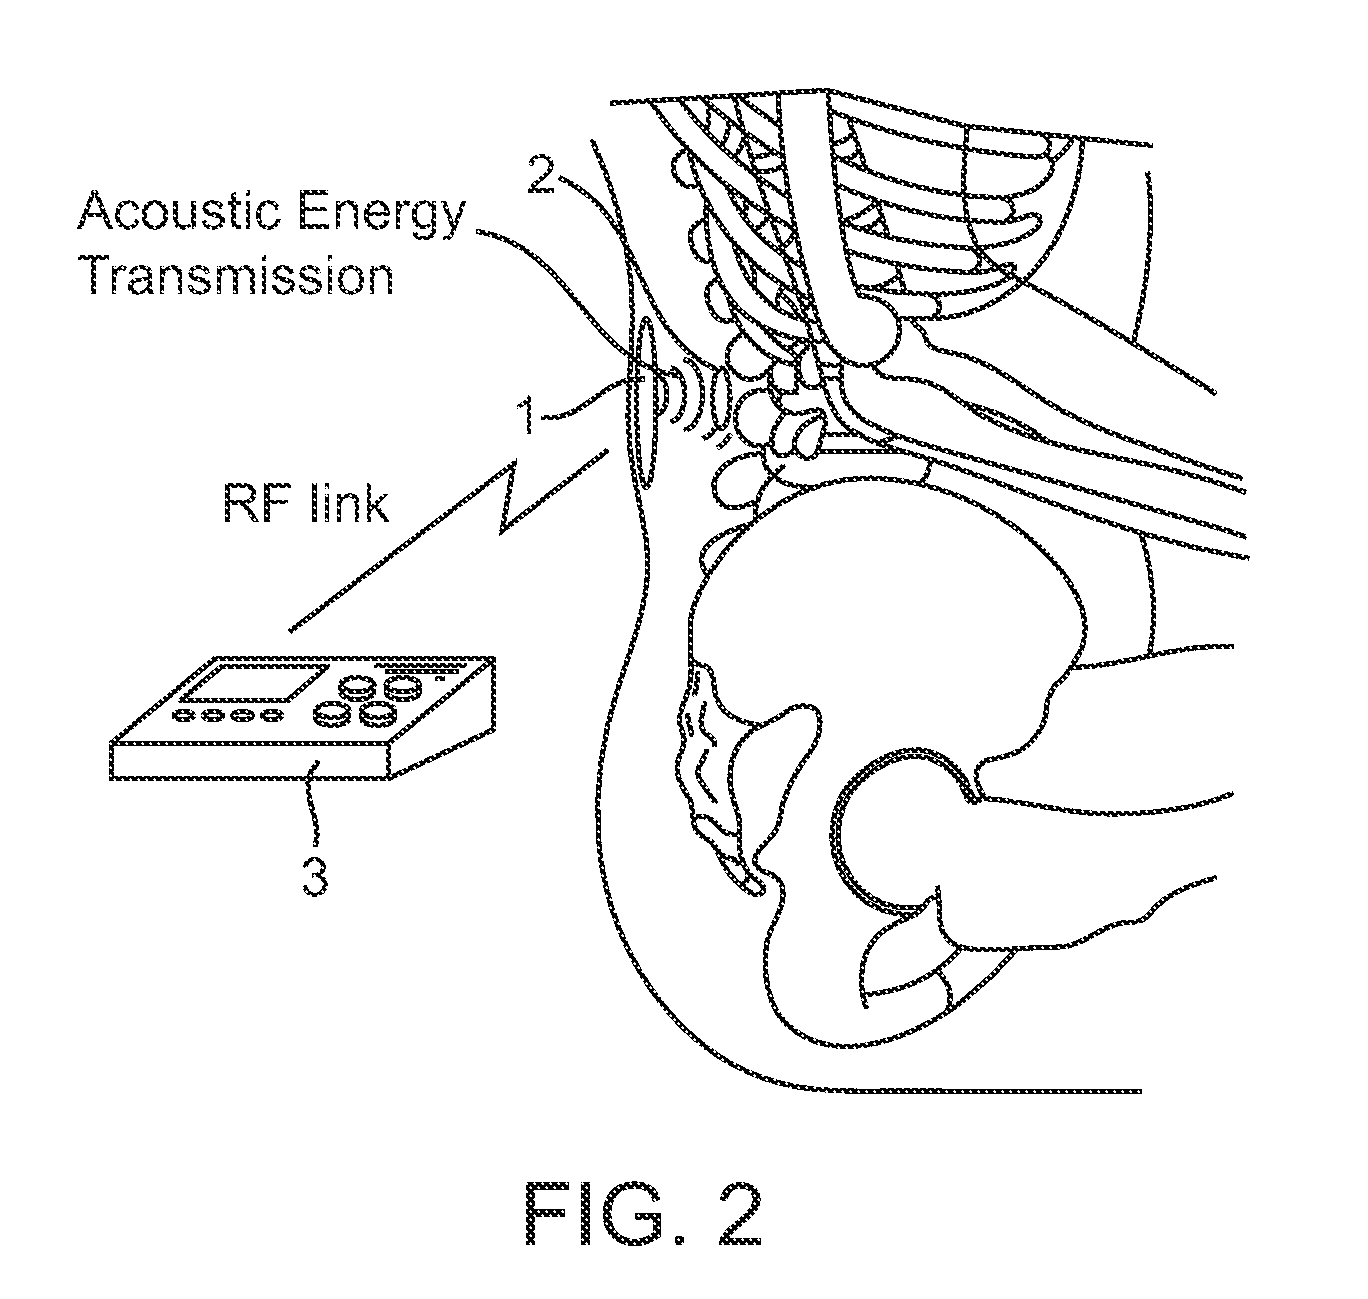 Systems and methods for implantable leadless spine stimulation